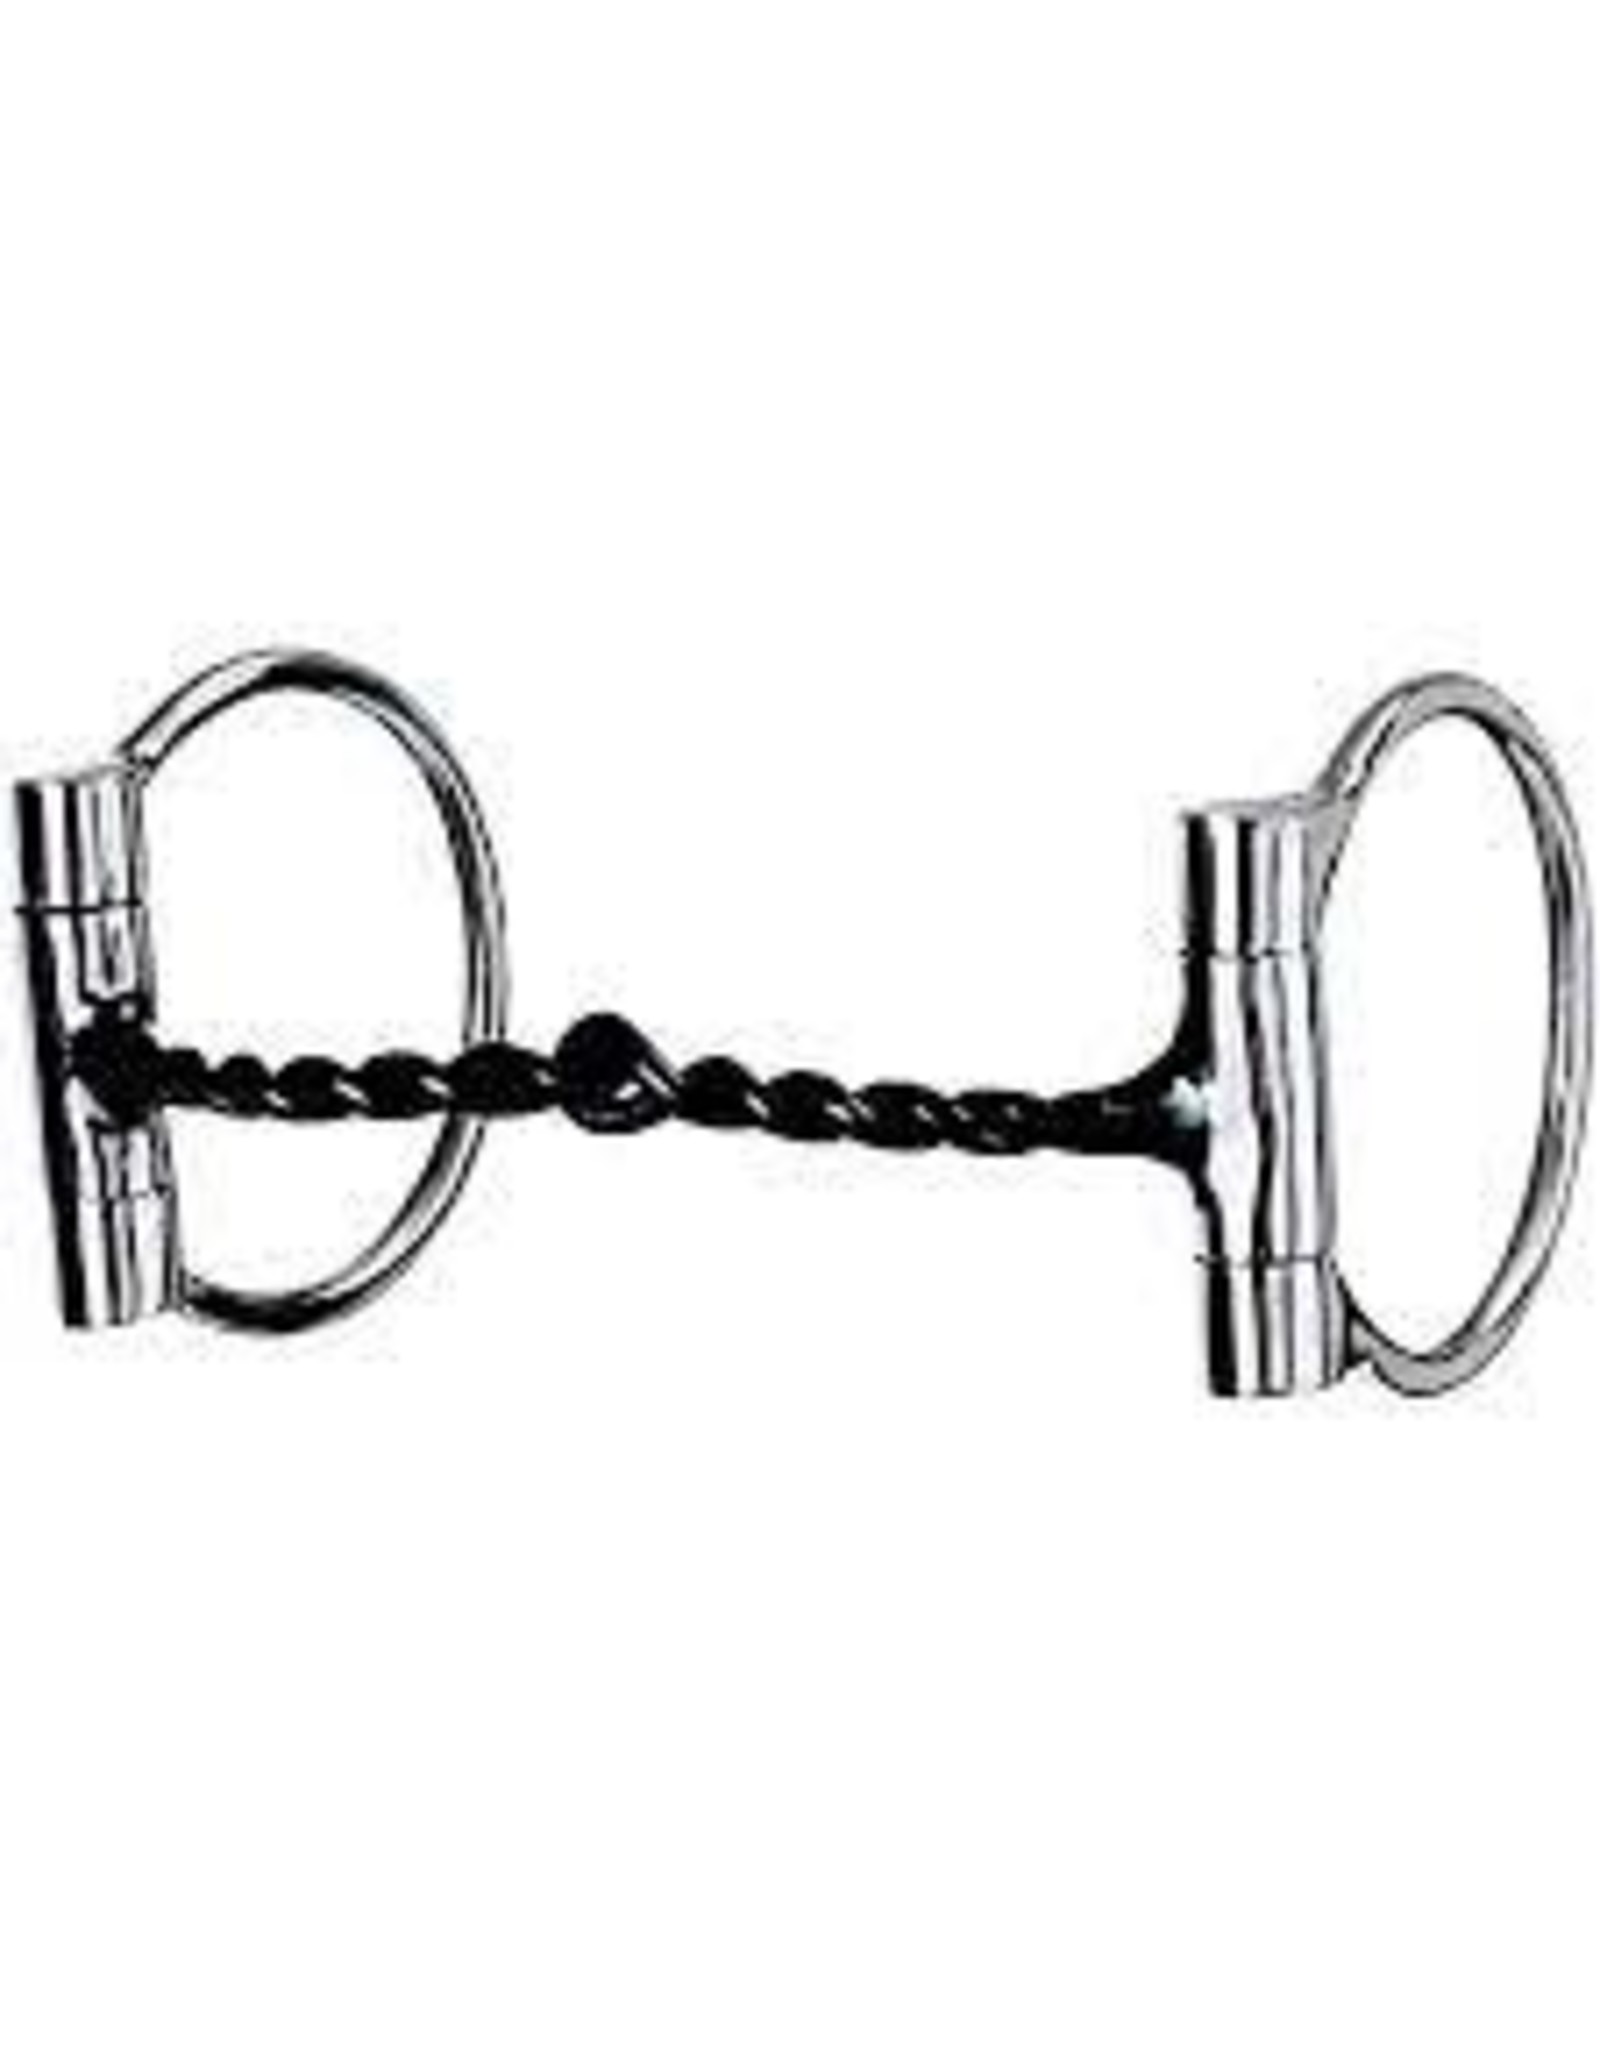 Pro Choice Twisted Wire D-Ring Snaffle Bit  5 1/4" Mouth, 2.5" Ring - PCB-981